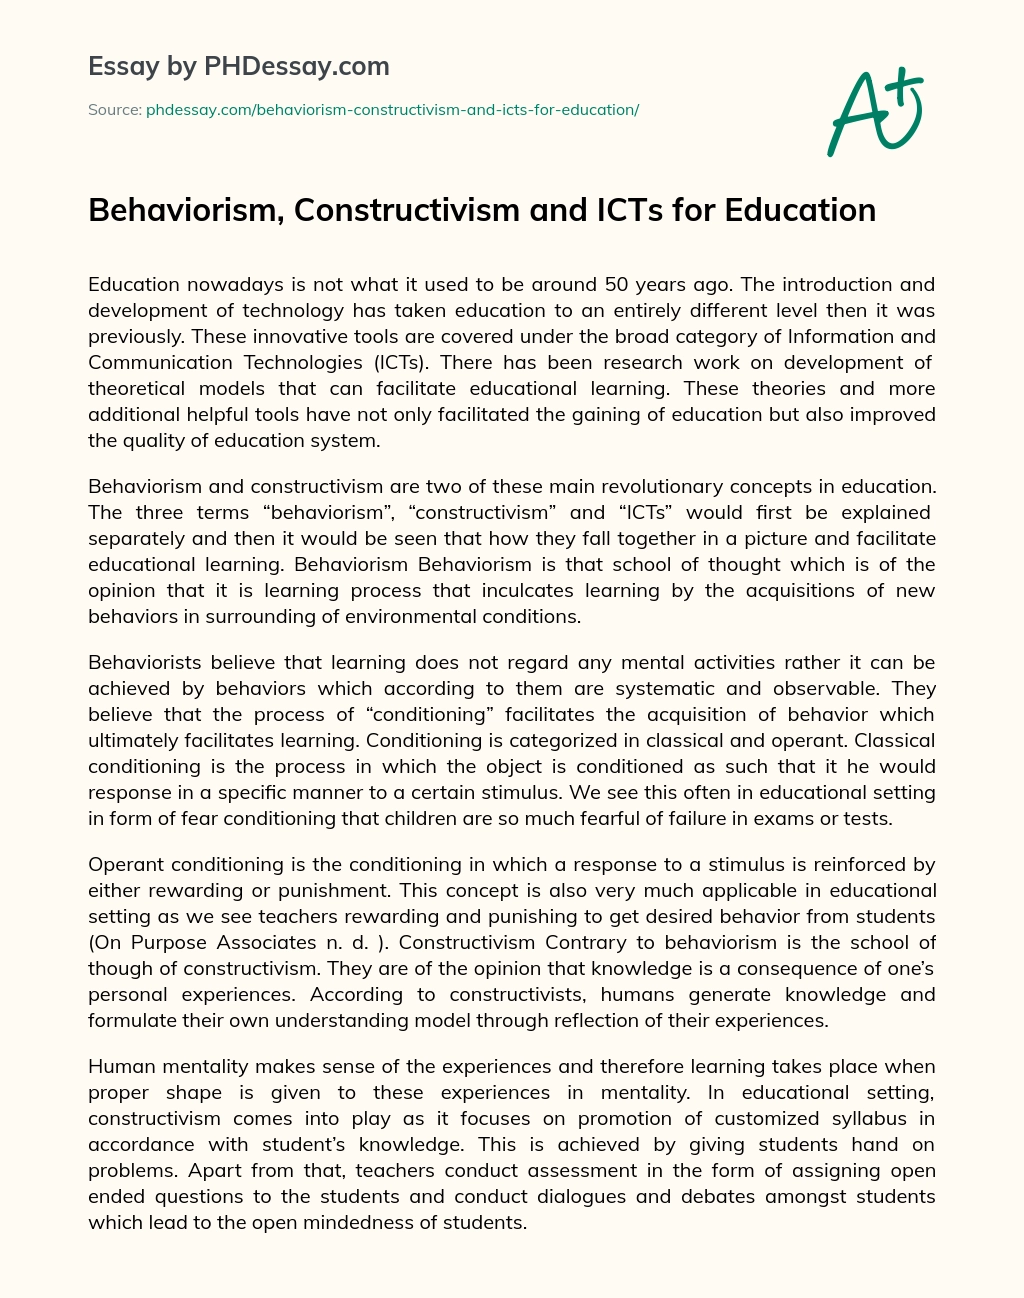 Behaviorism, Constructivism and ICTs for Education essay